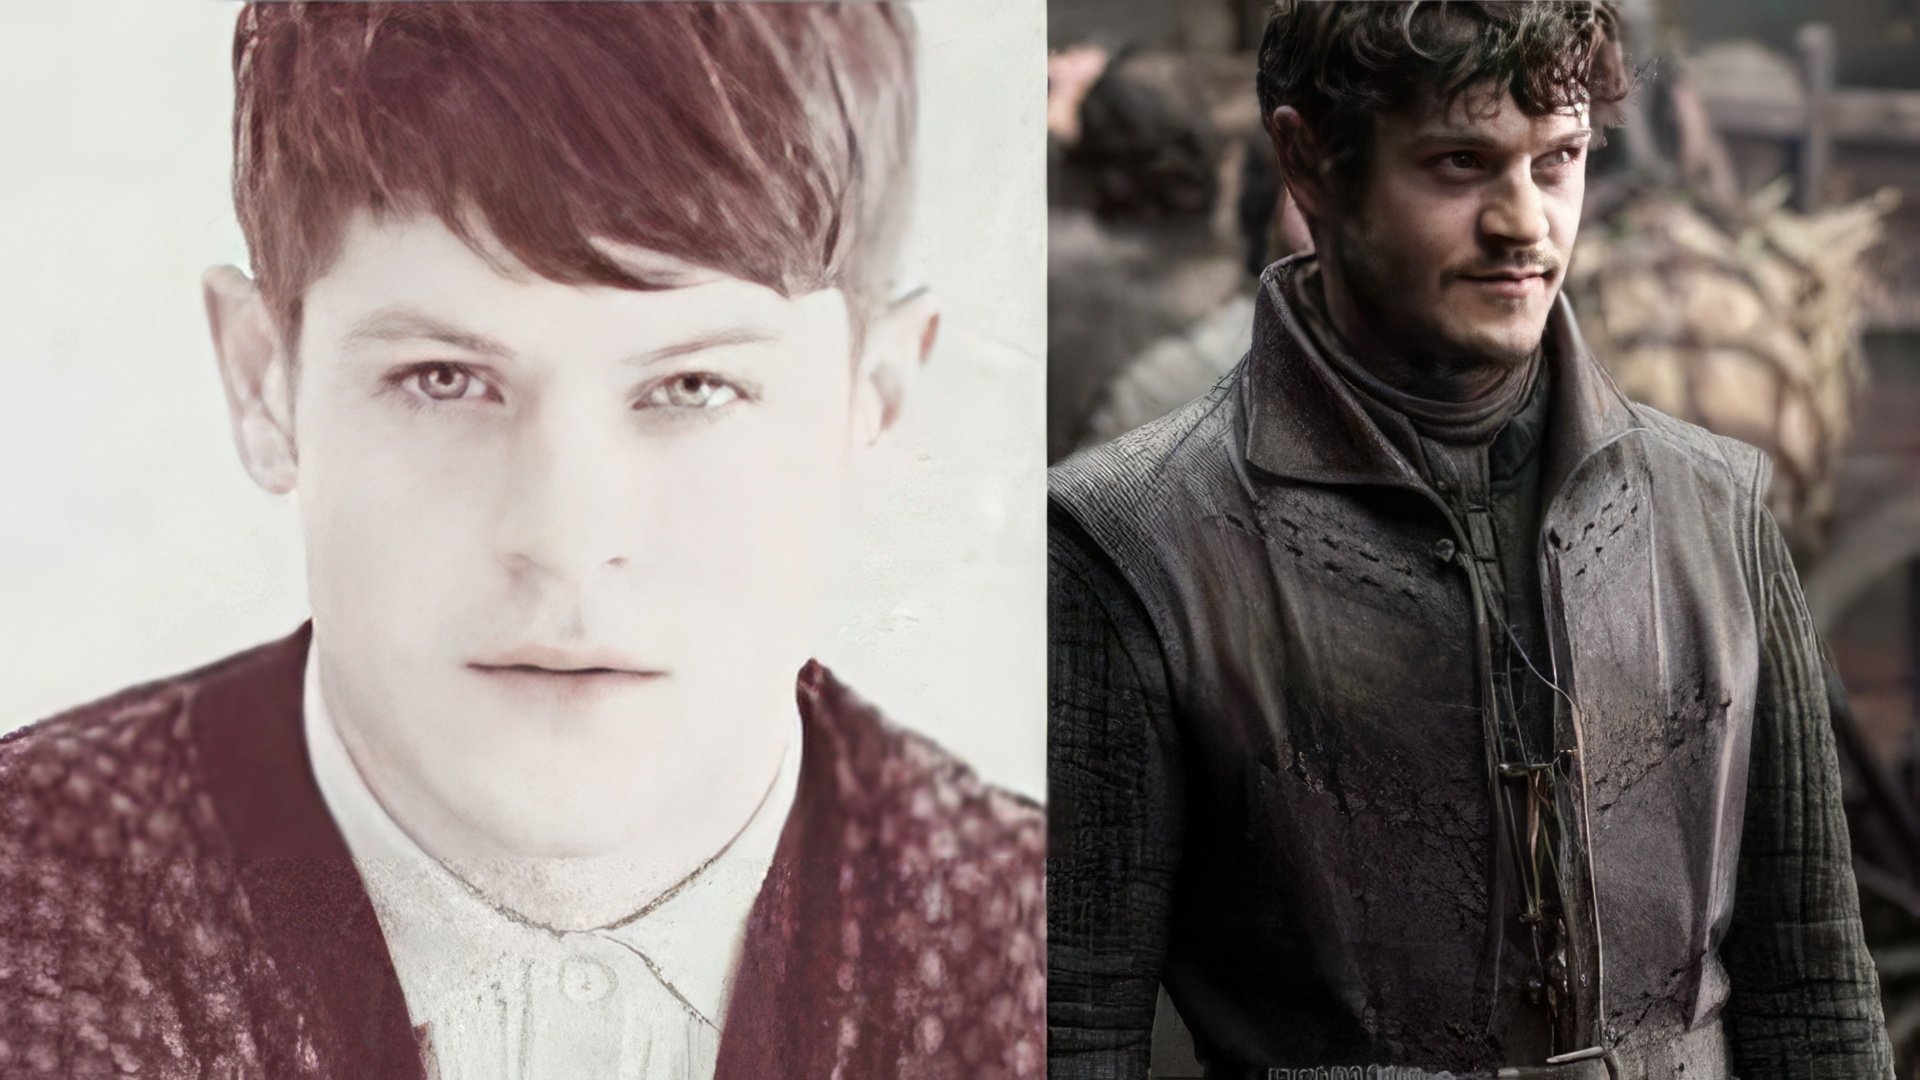 Iwan Rheon as a teenager and now